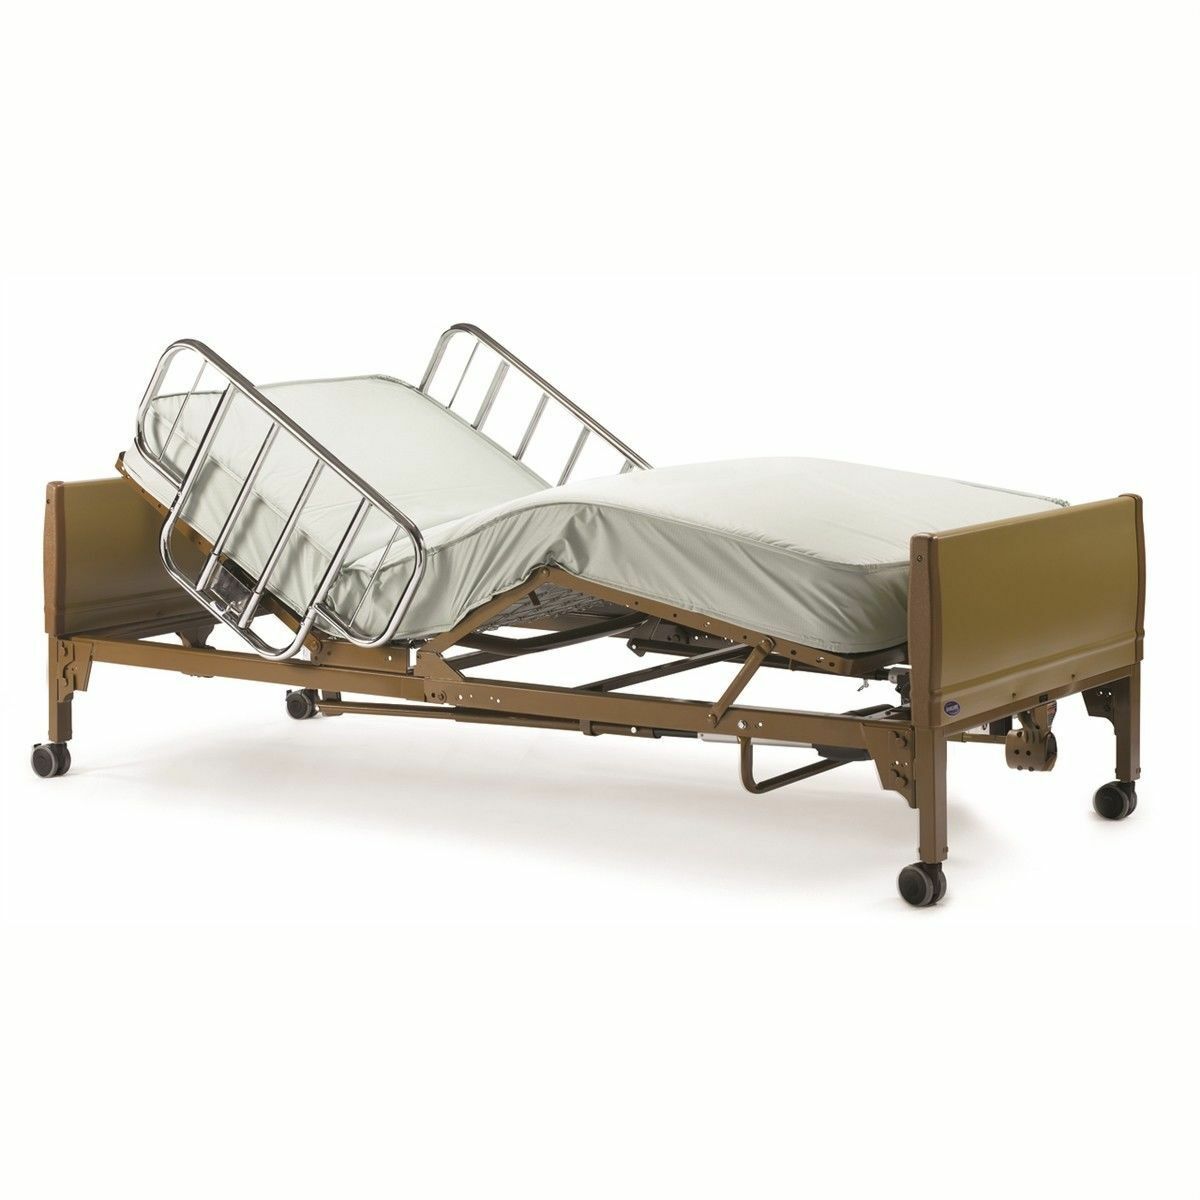 Image 21 - NEW Full Electric Hospital Bed Package  Includes (Free Mattress and Rails!) FREE